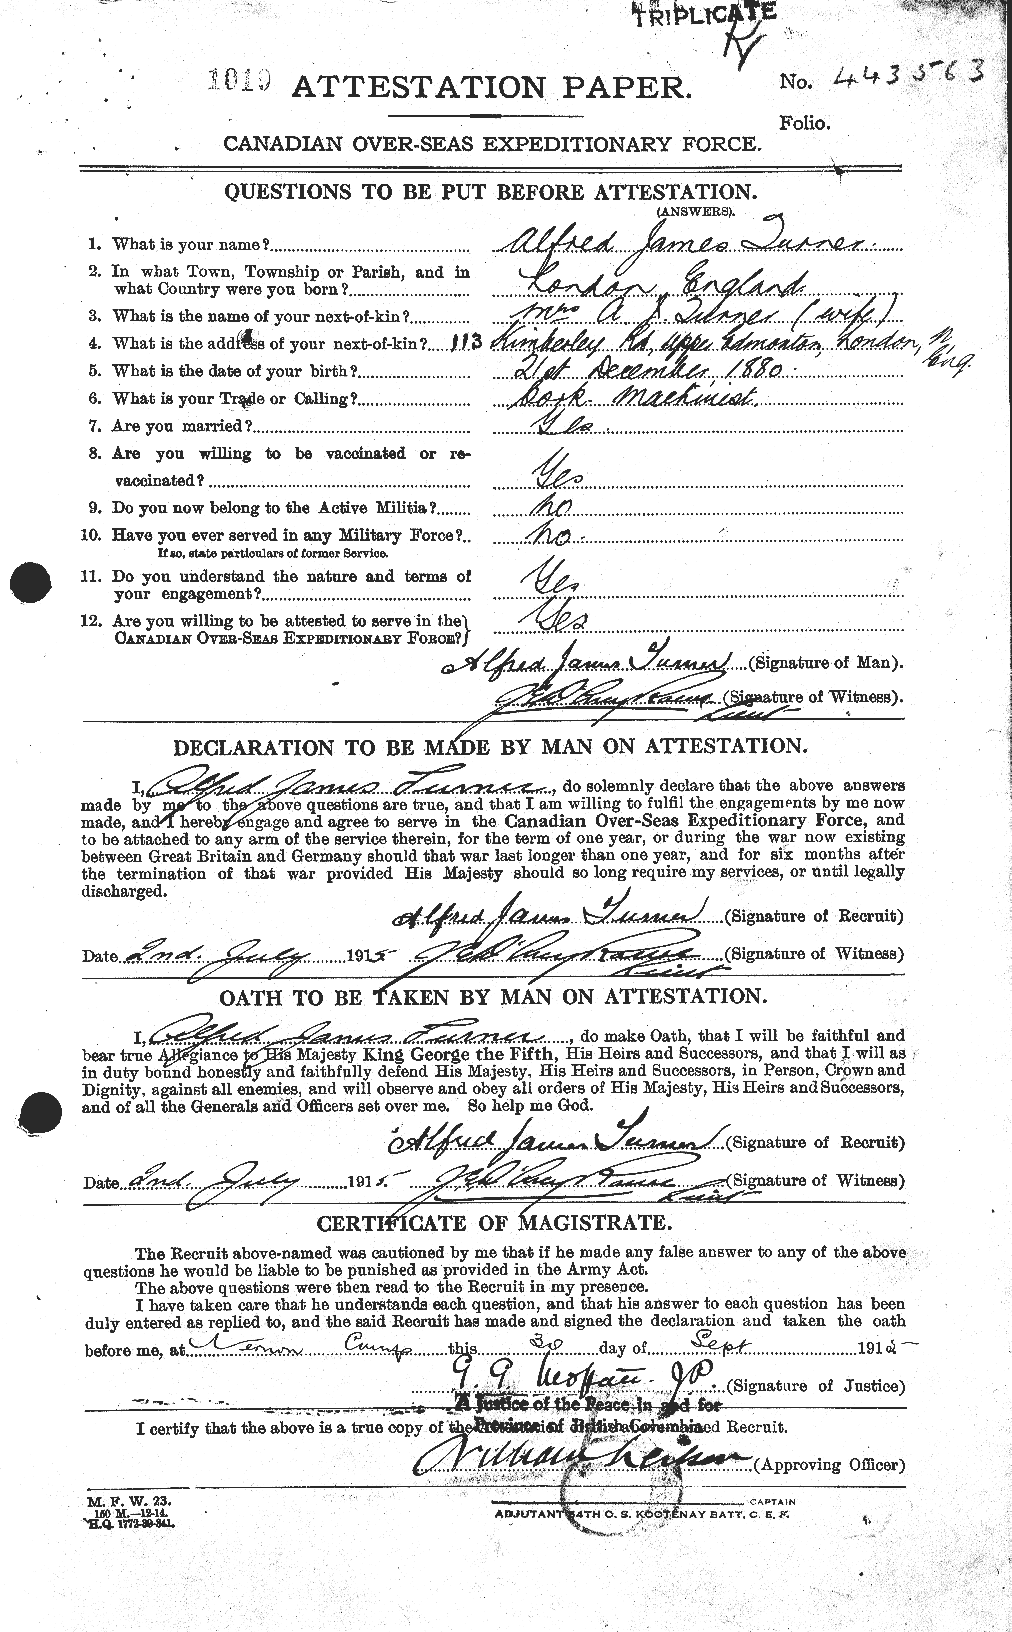 Personnel Records of the First World War - CEF 646246a